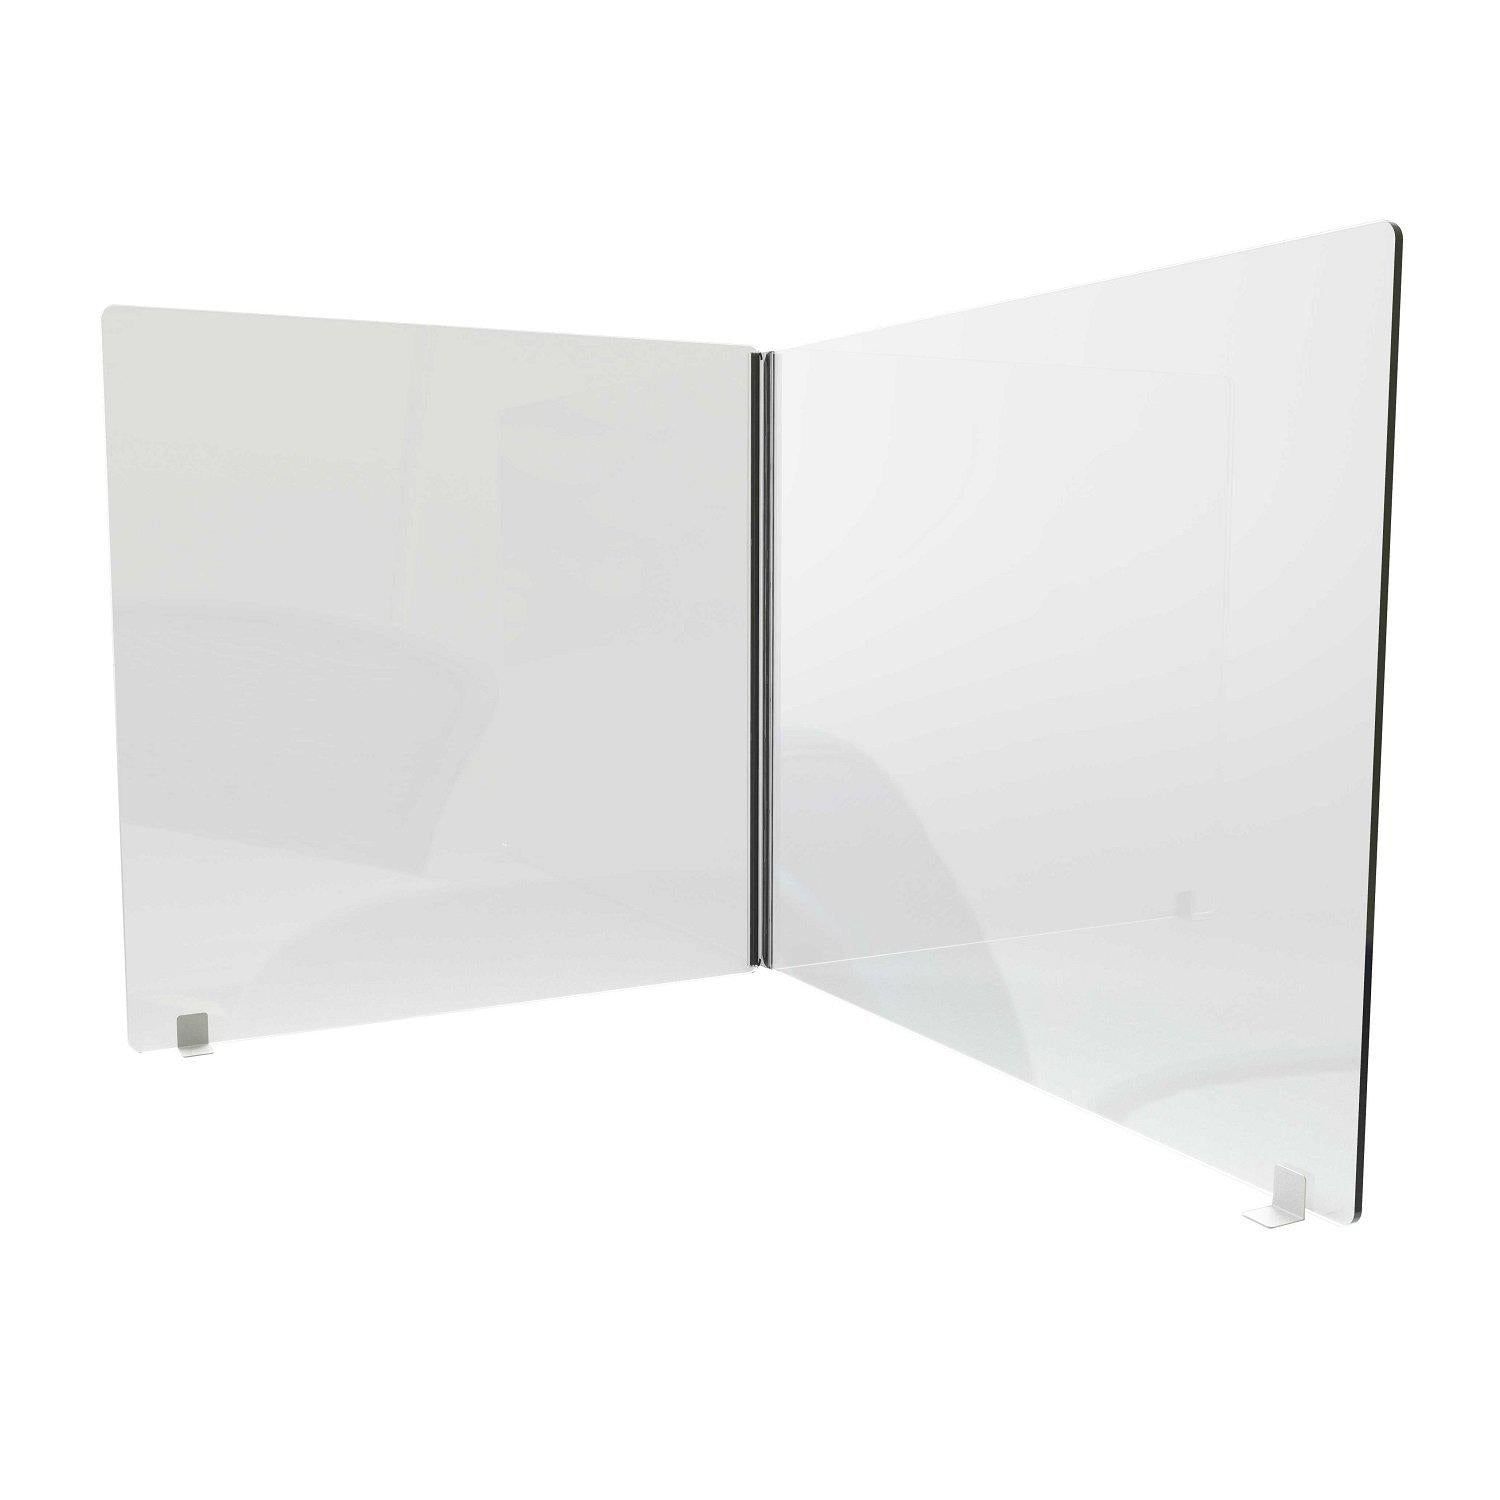 2-Sided Clear Thermoplastic Desktop Protection Screen/Sneeze Guard, 24”H x 24”W x 16”D